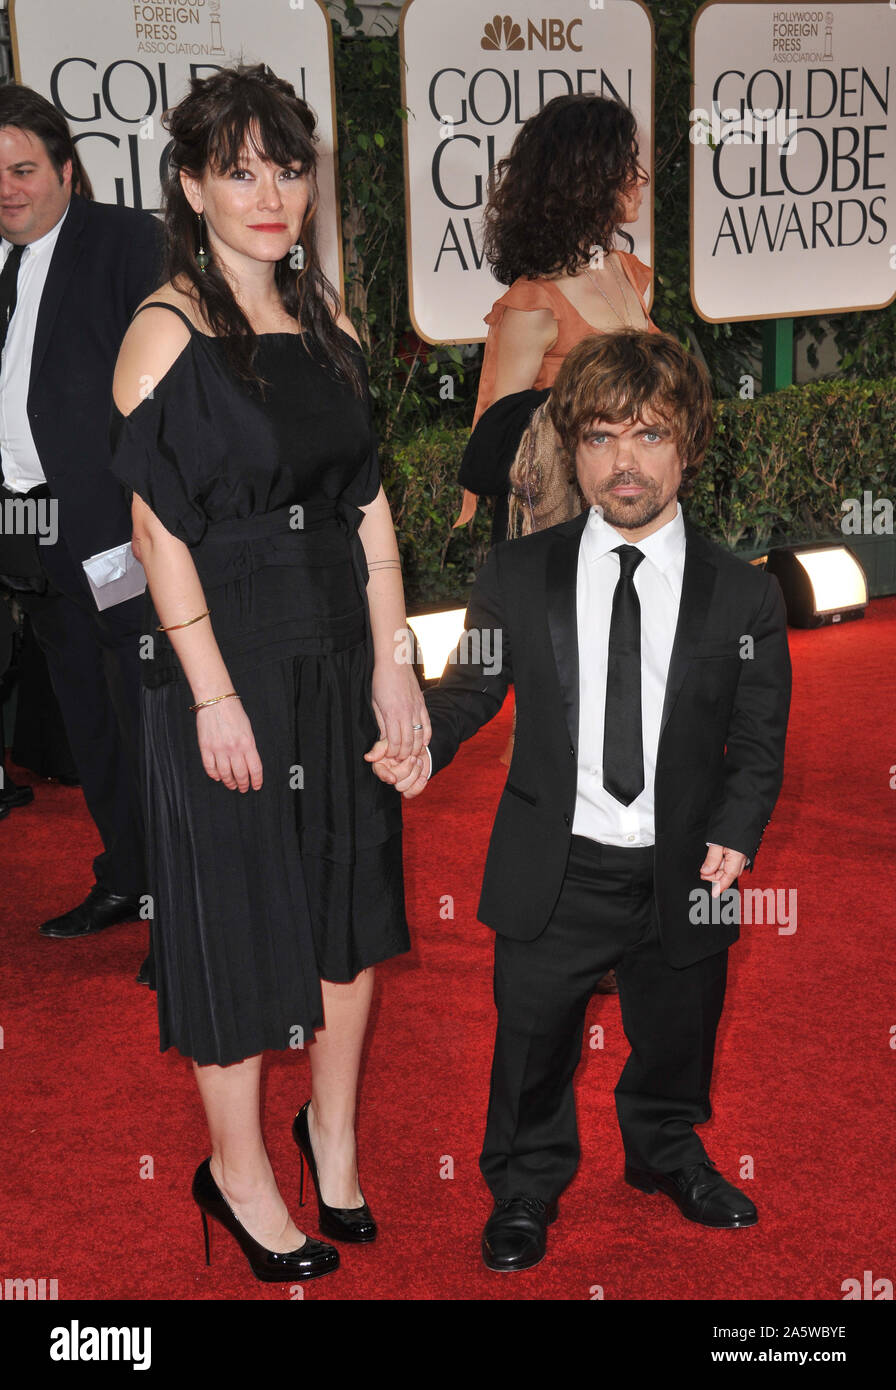 LOS ANGELES, CA. January 15, 2012: Peter Dinklage & Erica Schmidt at the 69th Golden Globe Awards at the Beverly Hilton Hotel. © 2012 Paul Smith / Featureflash Stock Photo